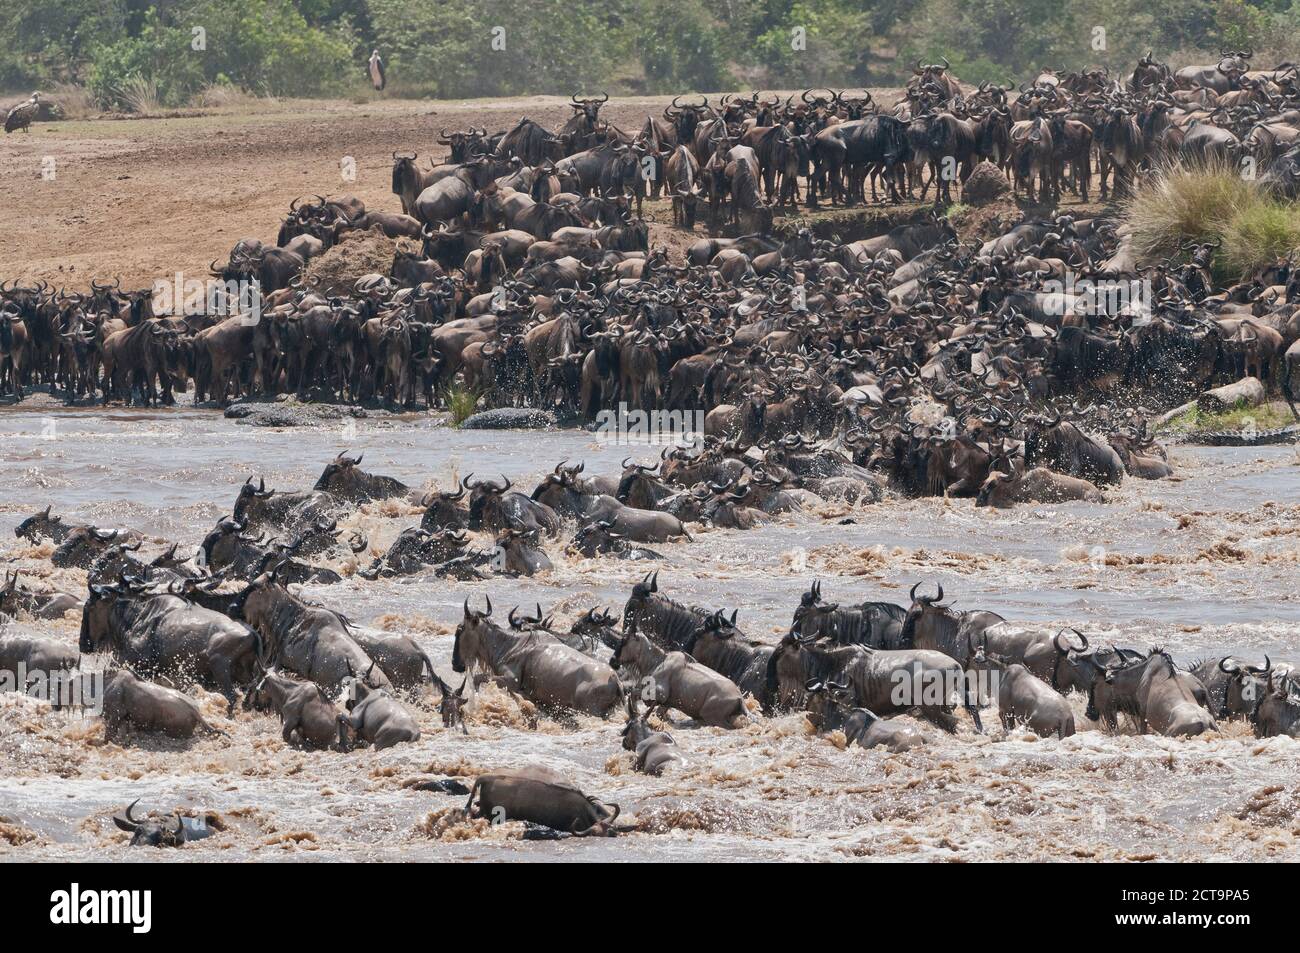 Africa, Kenya, Maasai Mara National Reserve, A herd of Blue Wildebeest (Connochaetes taurinus) crossing the Mara River during the Great Migration Stock Photo